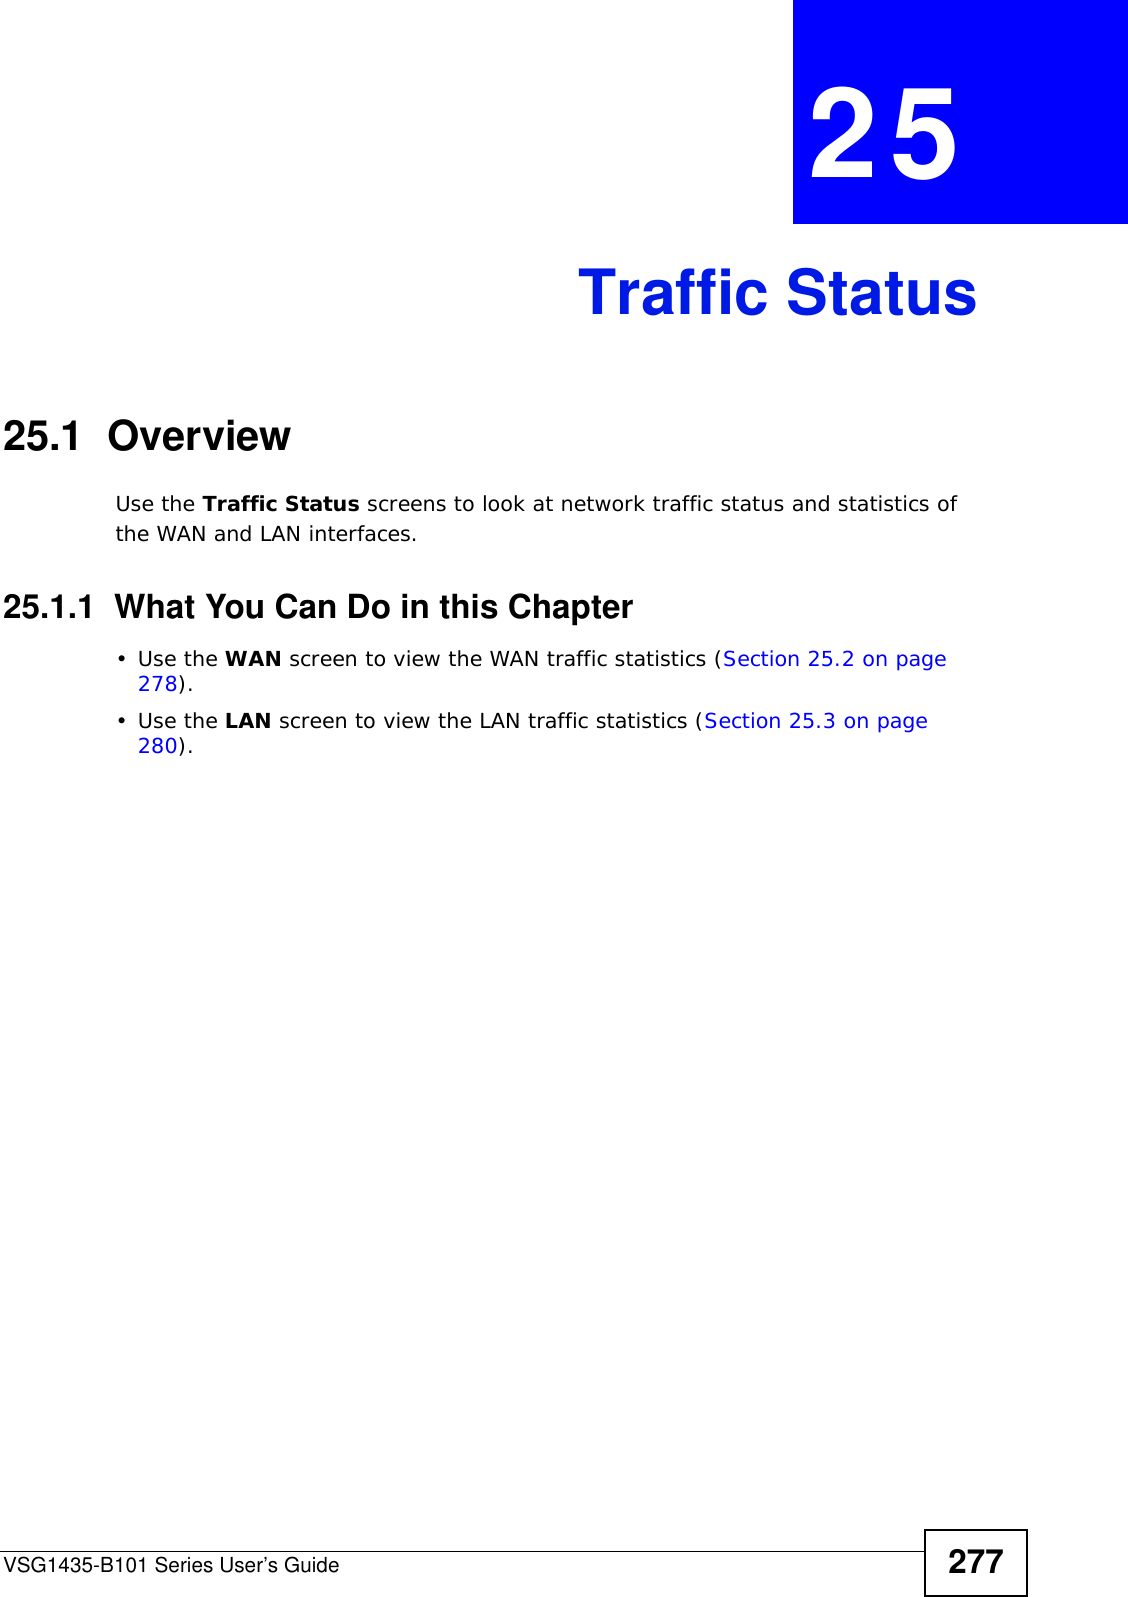 VSG1435-B101 Series User’s Guide 277CHAPTER  25 Traffic Status25.1  OverviewUse the Traffic Status screens to look at network traffic status and statistics of the WAN and LAN interfaces. 25.1.1  What You Can Do in this Chapter•Use the WAN screen to view the WAN traffic statistics (Section 25.2 on page 278).•Use the LAN screen to view the LAN traffic statistics (Section 25.3 on page 280).